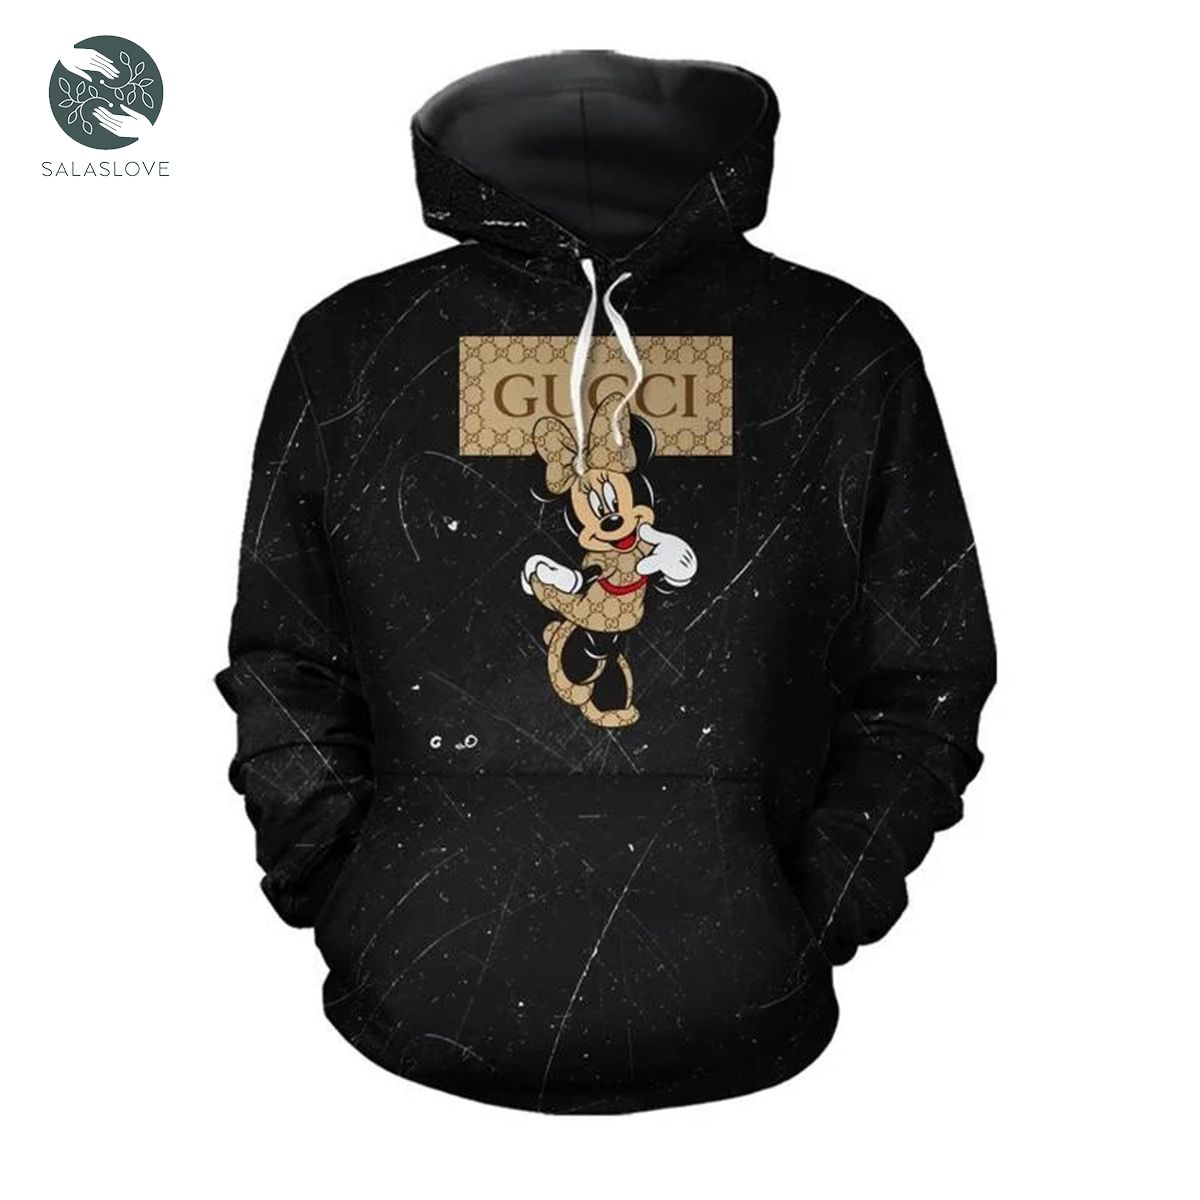 Gucci Minnie Mouse Unisex Hoodie For Men Women Disney Luxury Outfit